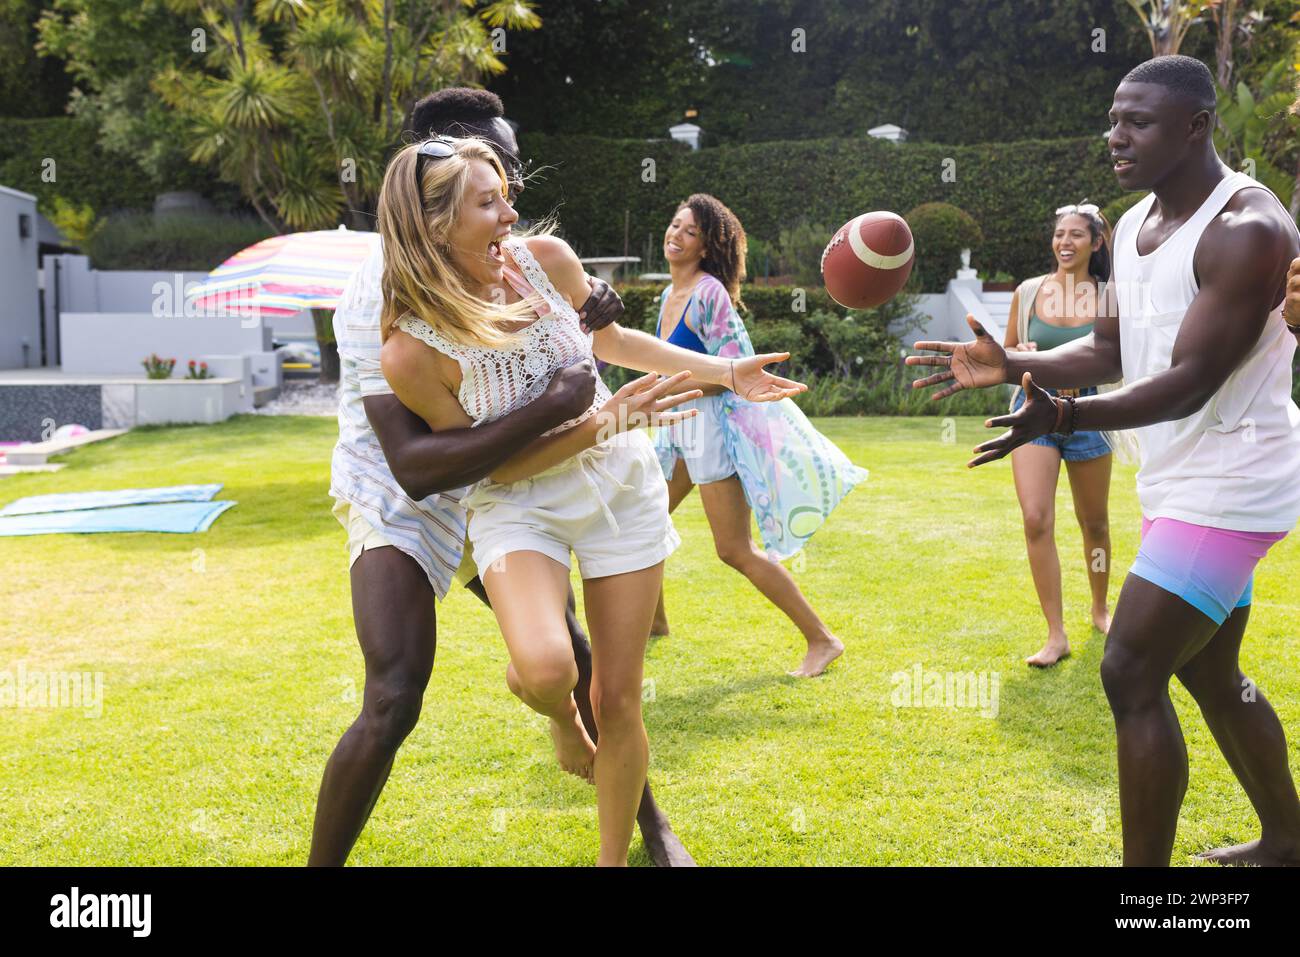 Young Caucasian woman catches a football, cheered on by a young African American man Stock Photo